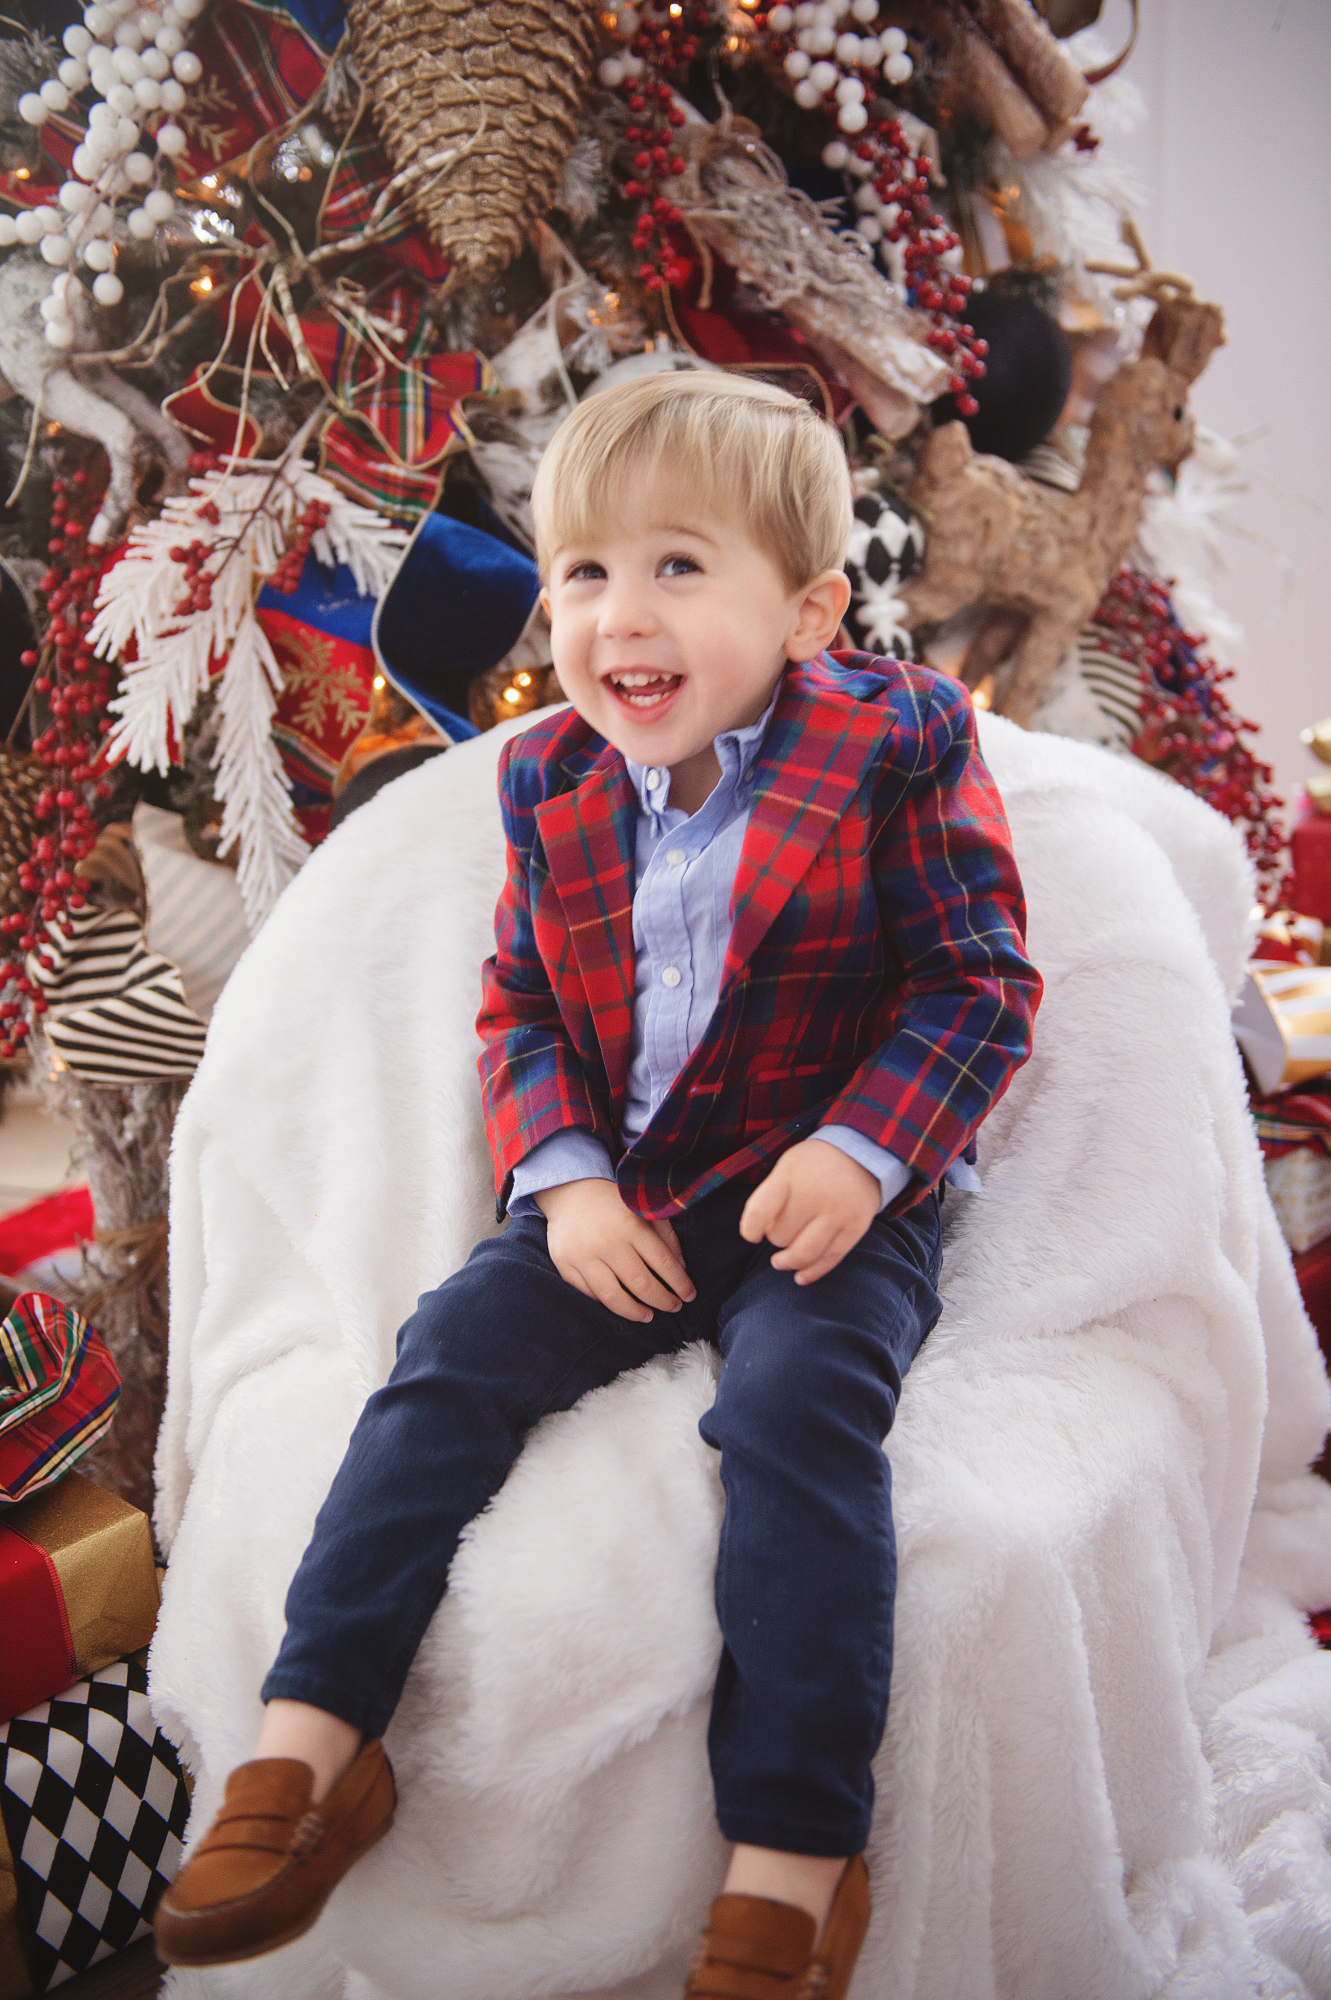 family Christmas card outfit inspiration, smocked Christmas dress baby, baby boy fashion Christmas, pinterest Christmas tree decor, shop hello holidays, Emily Gemma, the sweetest thing blog | Merry Christmas Wishes To You & Yours🎁❤️🎄 [Our Christmas Card 2019] by popular Oklahoma life and style blog, The Sweetest Thing: image of a little boy sitting in front of their Christmas tree and wearing Zara BASIC SERGED SKINNY JEANS, Zara  LEATHER LOAFERS, Janie and Jack POPLIN SHIRT, Janie and Jack PLAID WOOL BLAZER.